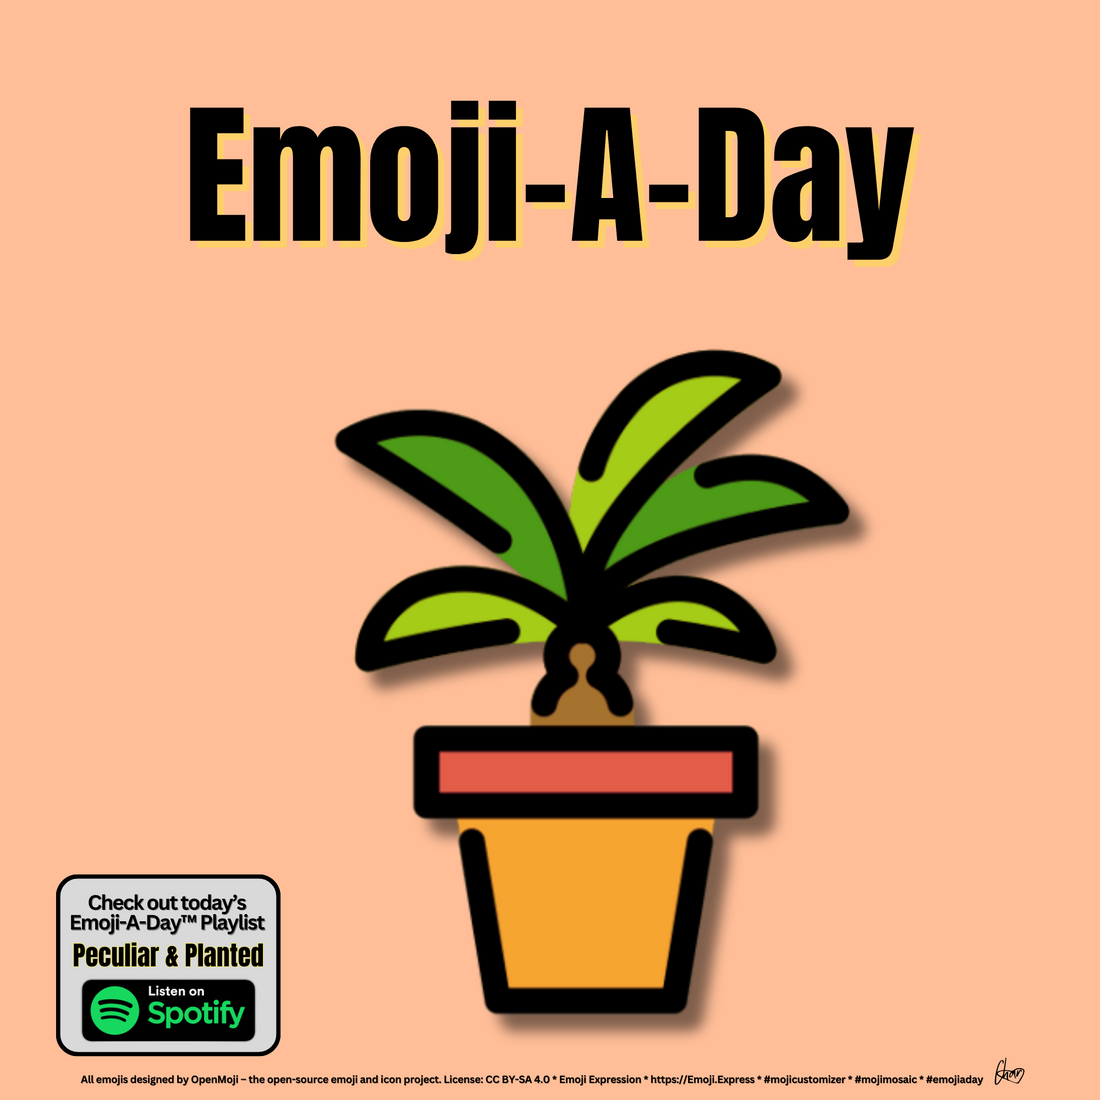 Emoij-A-Day theme with Potted Plant emoji and Peculiar & Planted Spotify Playlist